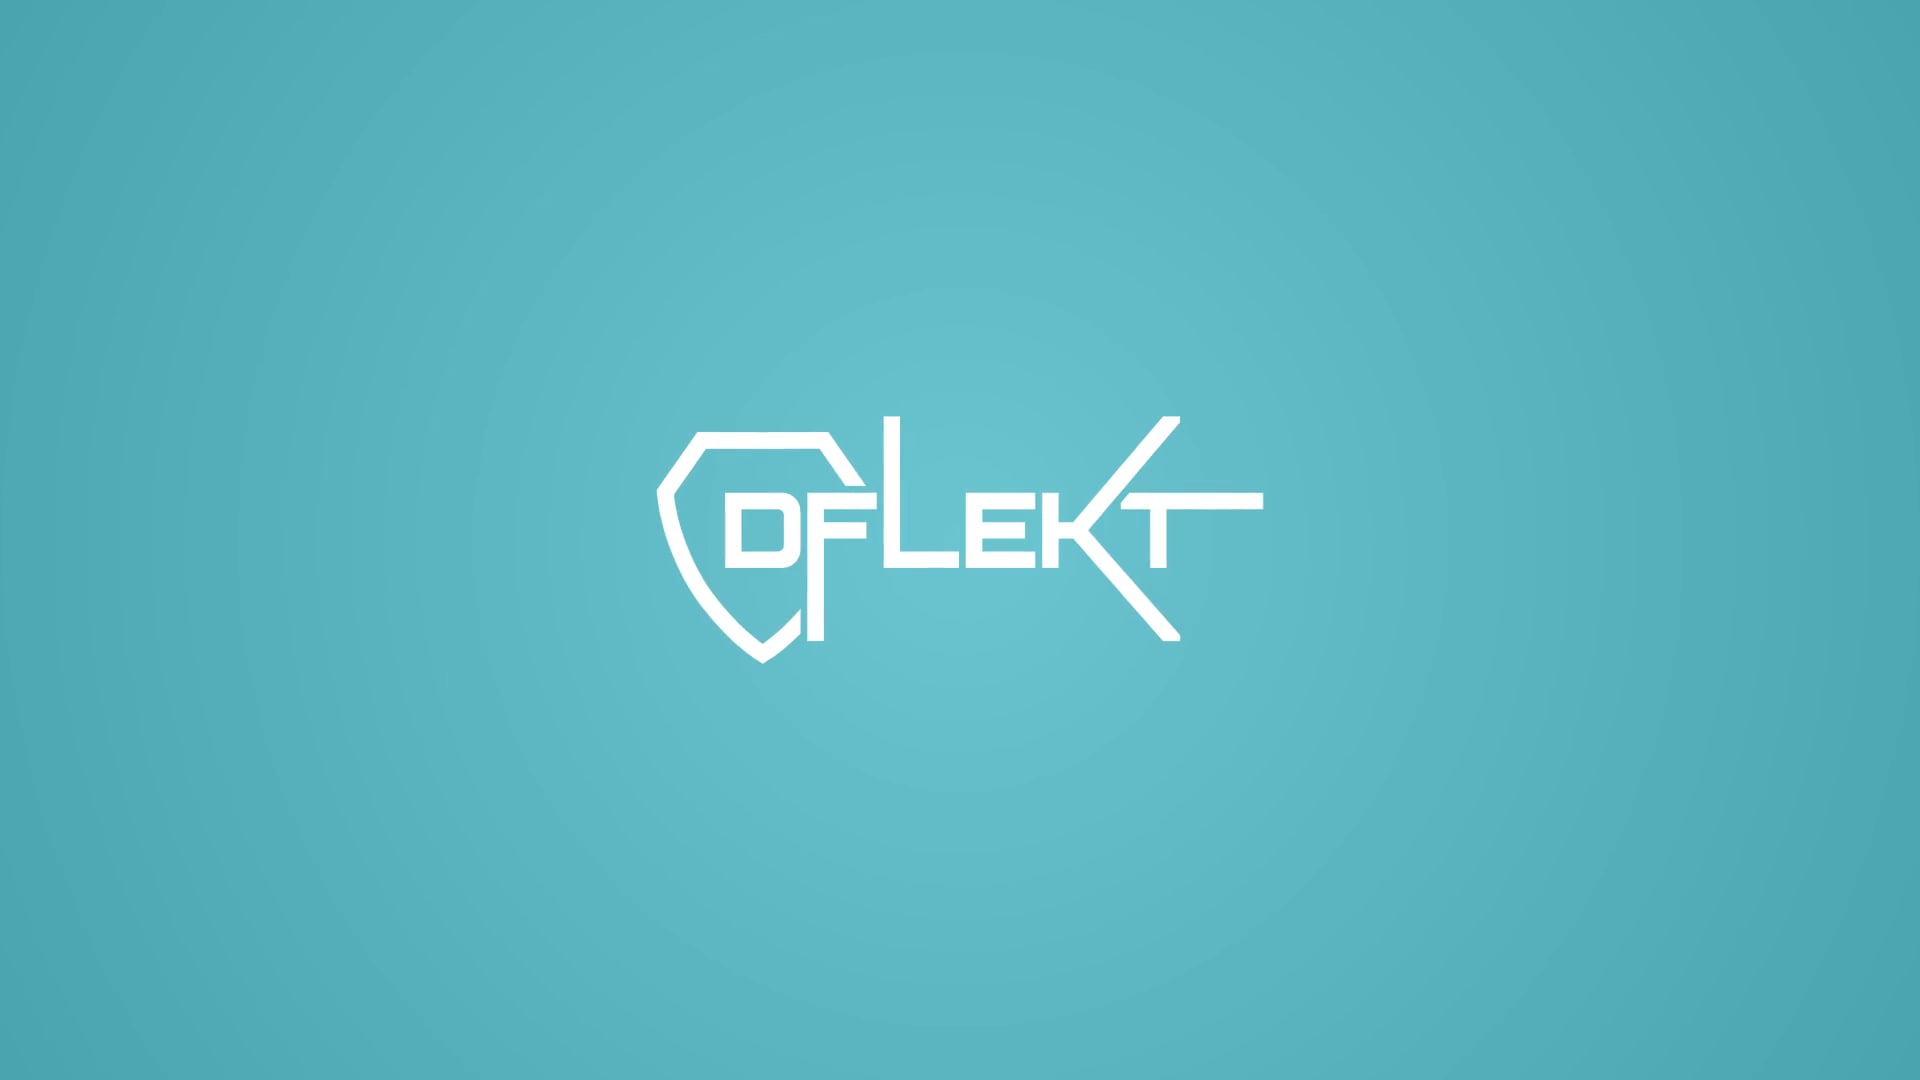 Dflekt - Protect your keyless cars